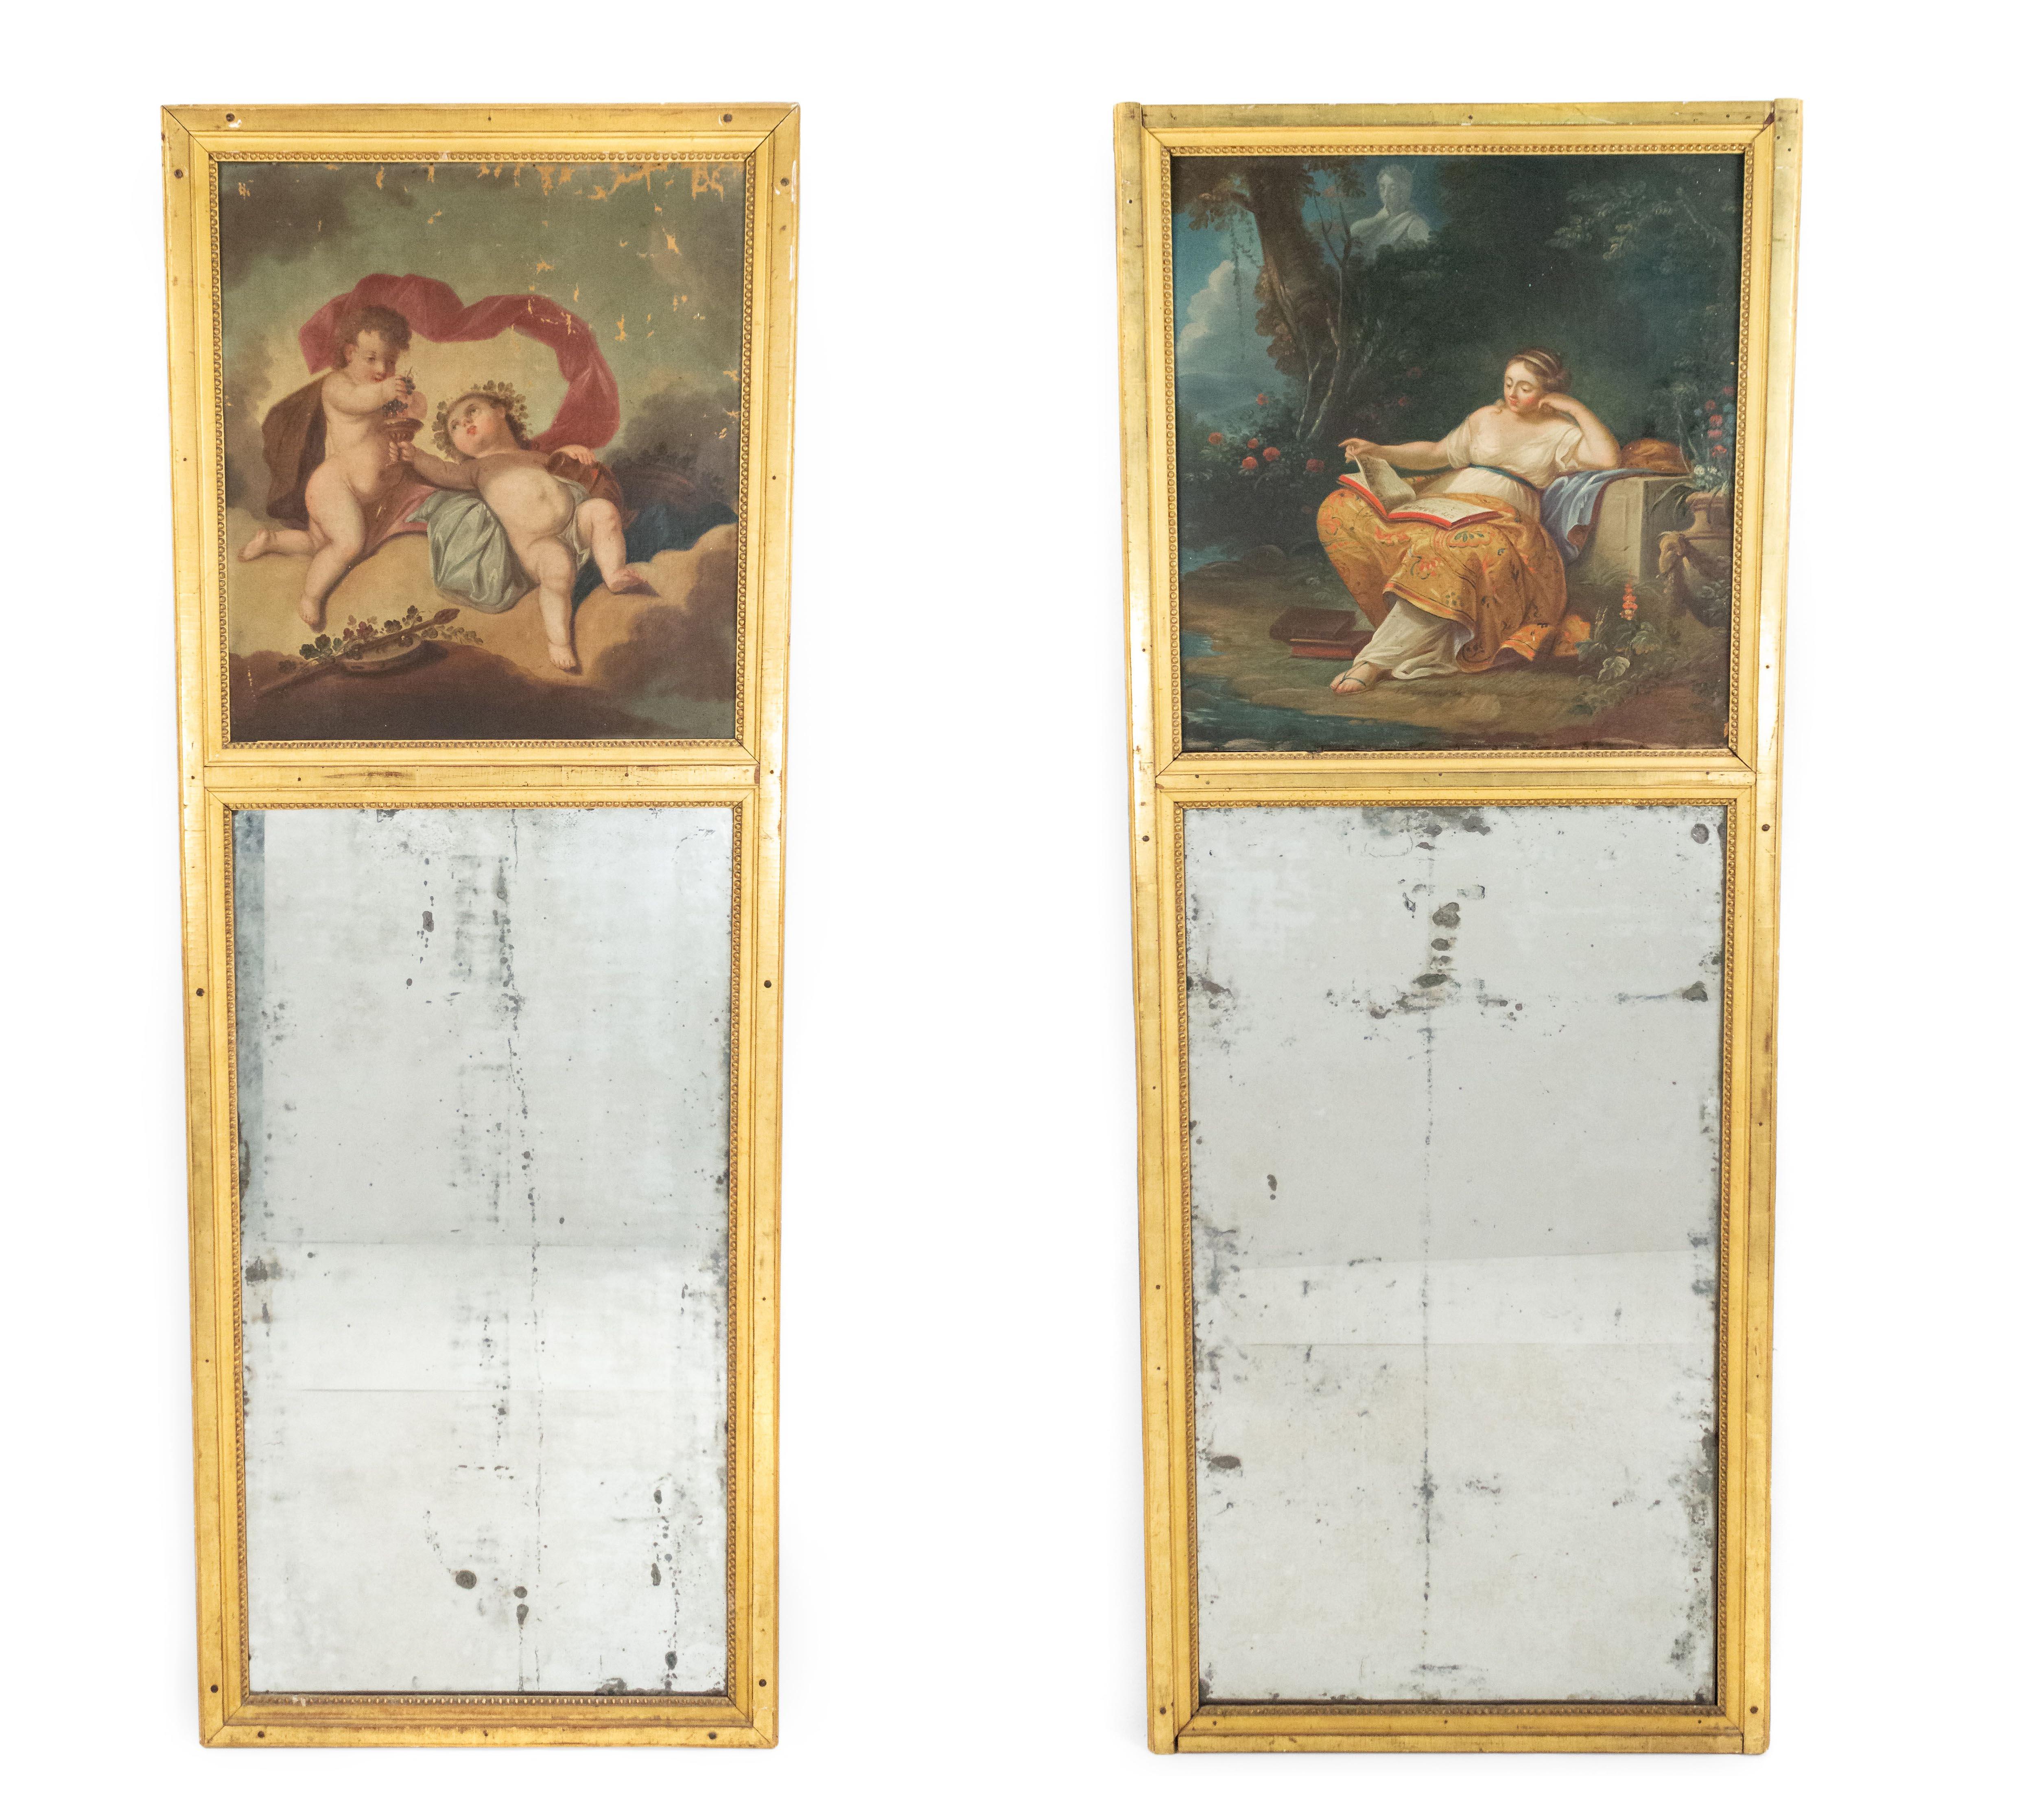 Pair of French Louis XV (18th Century) giltwood trumeau / wall mirrors with oil painting panel inserts depicting cherubs and a seated woman in a garden with original glass lower panels. (PRICED AS Pair)
